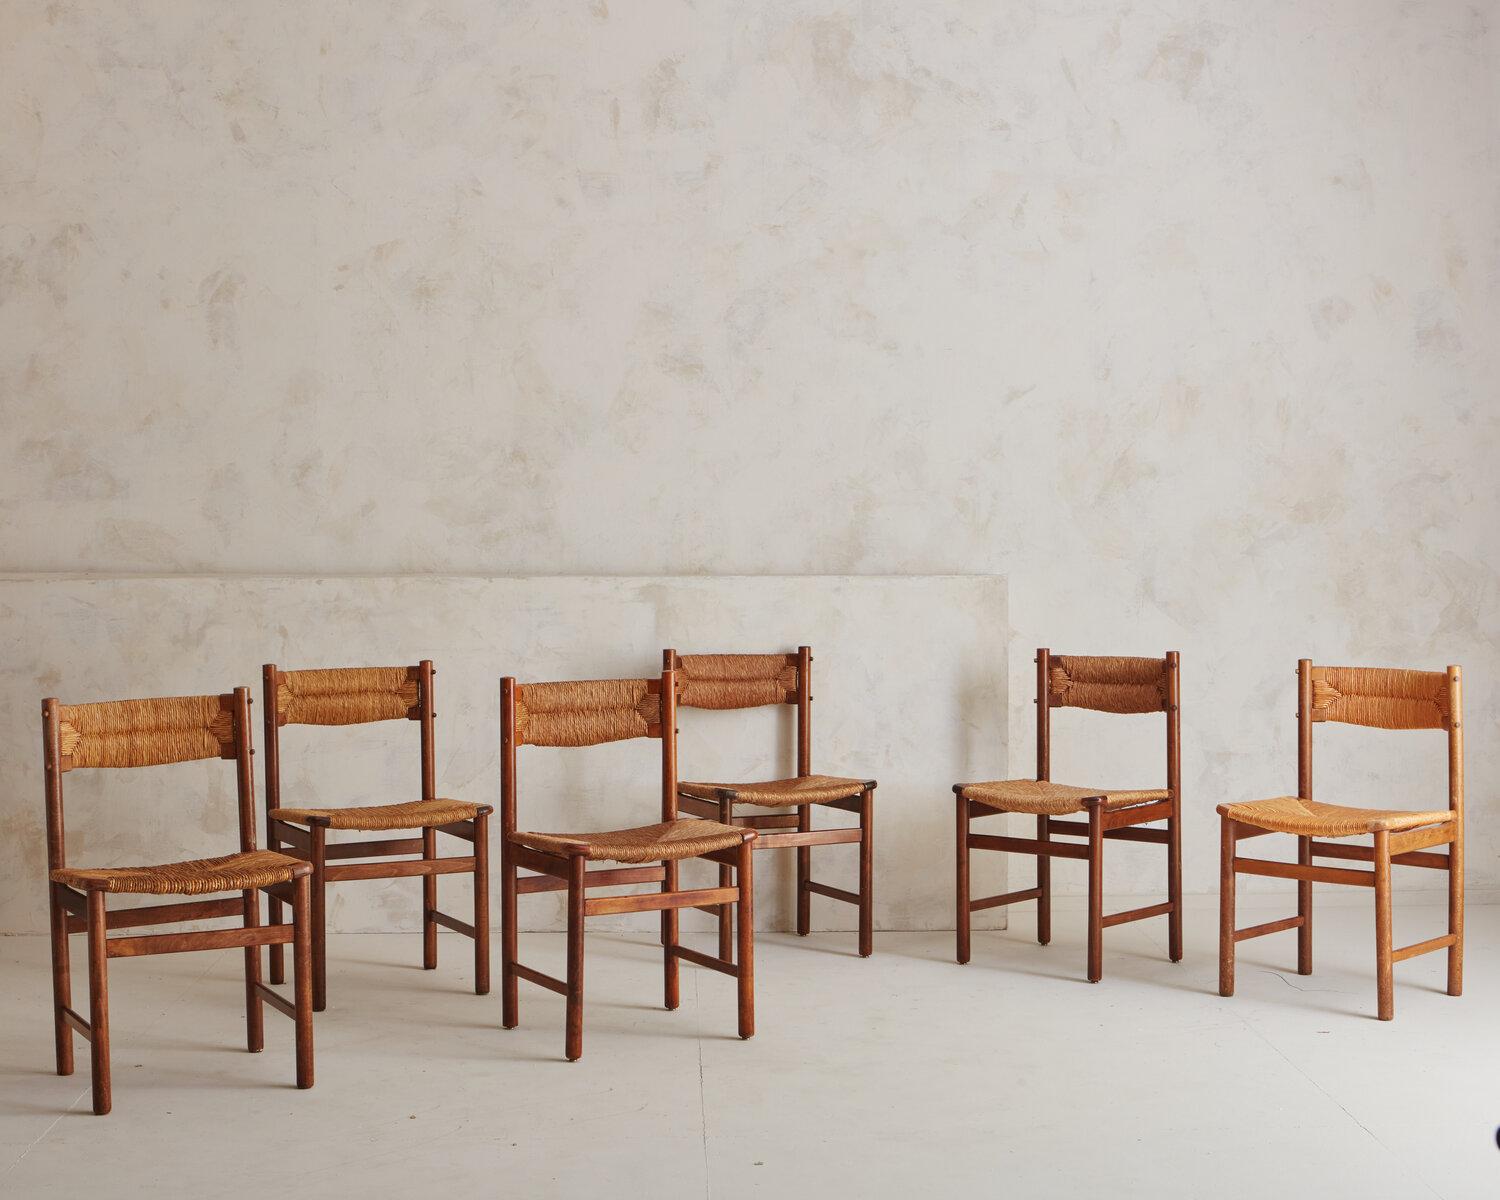 A set of 6 French Dining Chairs in wood and rush. Sourced in France, 1950s. These Classic chairs showcase a harmony in design, material and construction. 

DIMENSIONS: 29.75”H, 31”H, 31.25”H x 18.25”W x 15.5”D; 17.25”Seat Height.